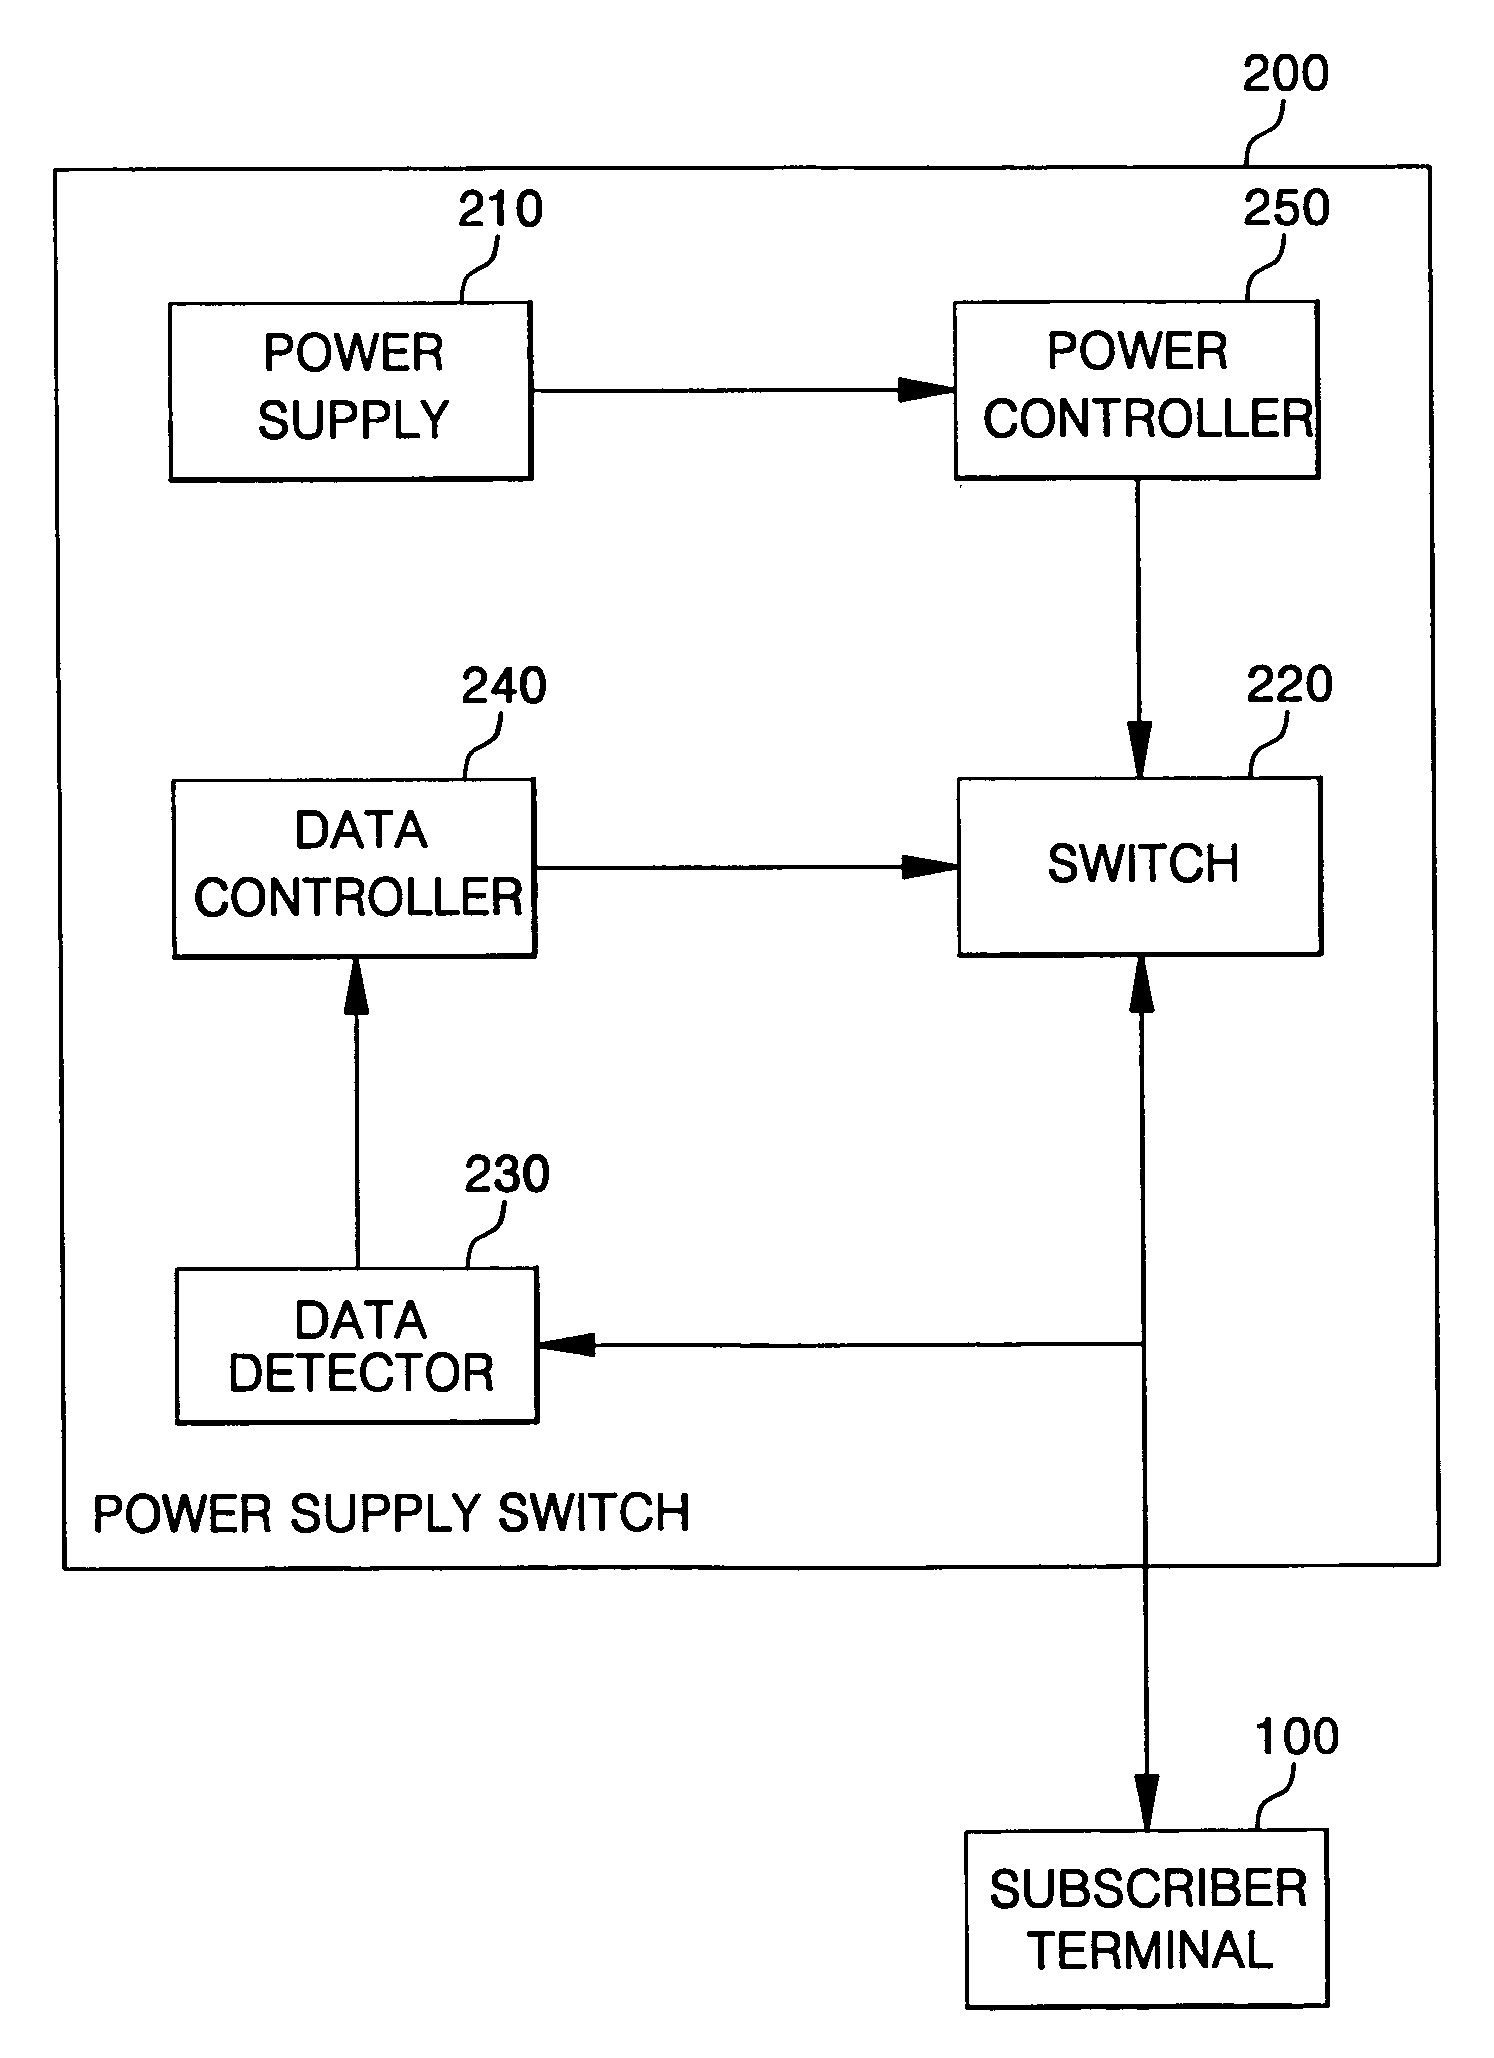 Power-line communication system to supply power and data to integrated services digital network (ISDN) subscriber terminal and control method thereof